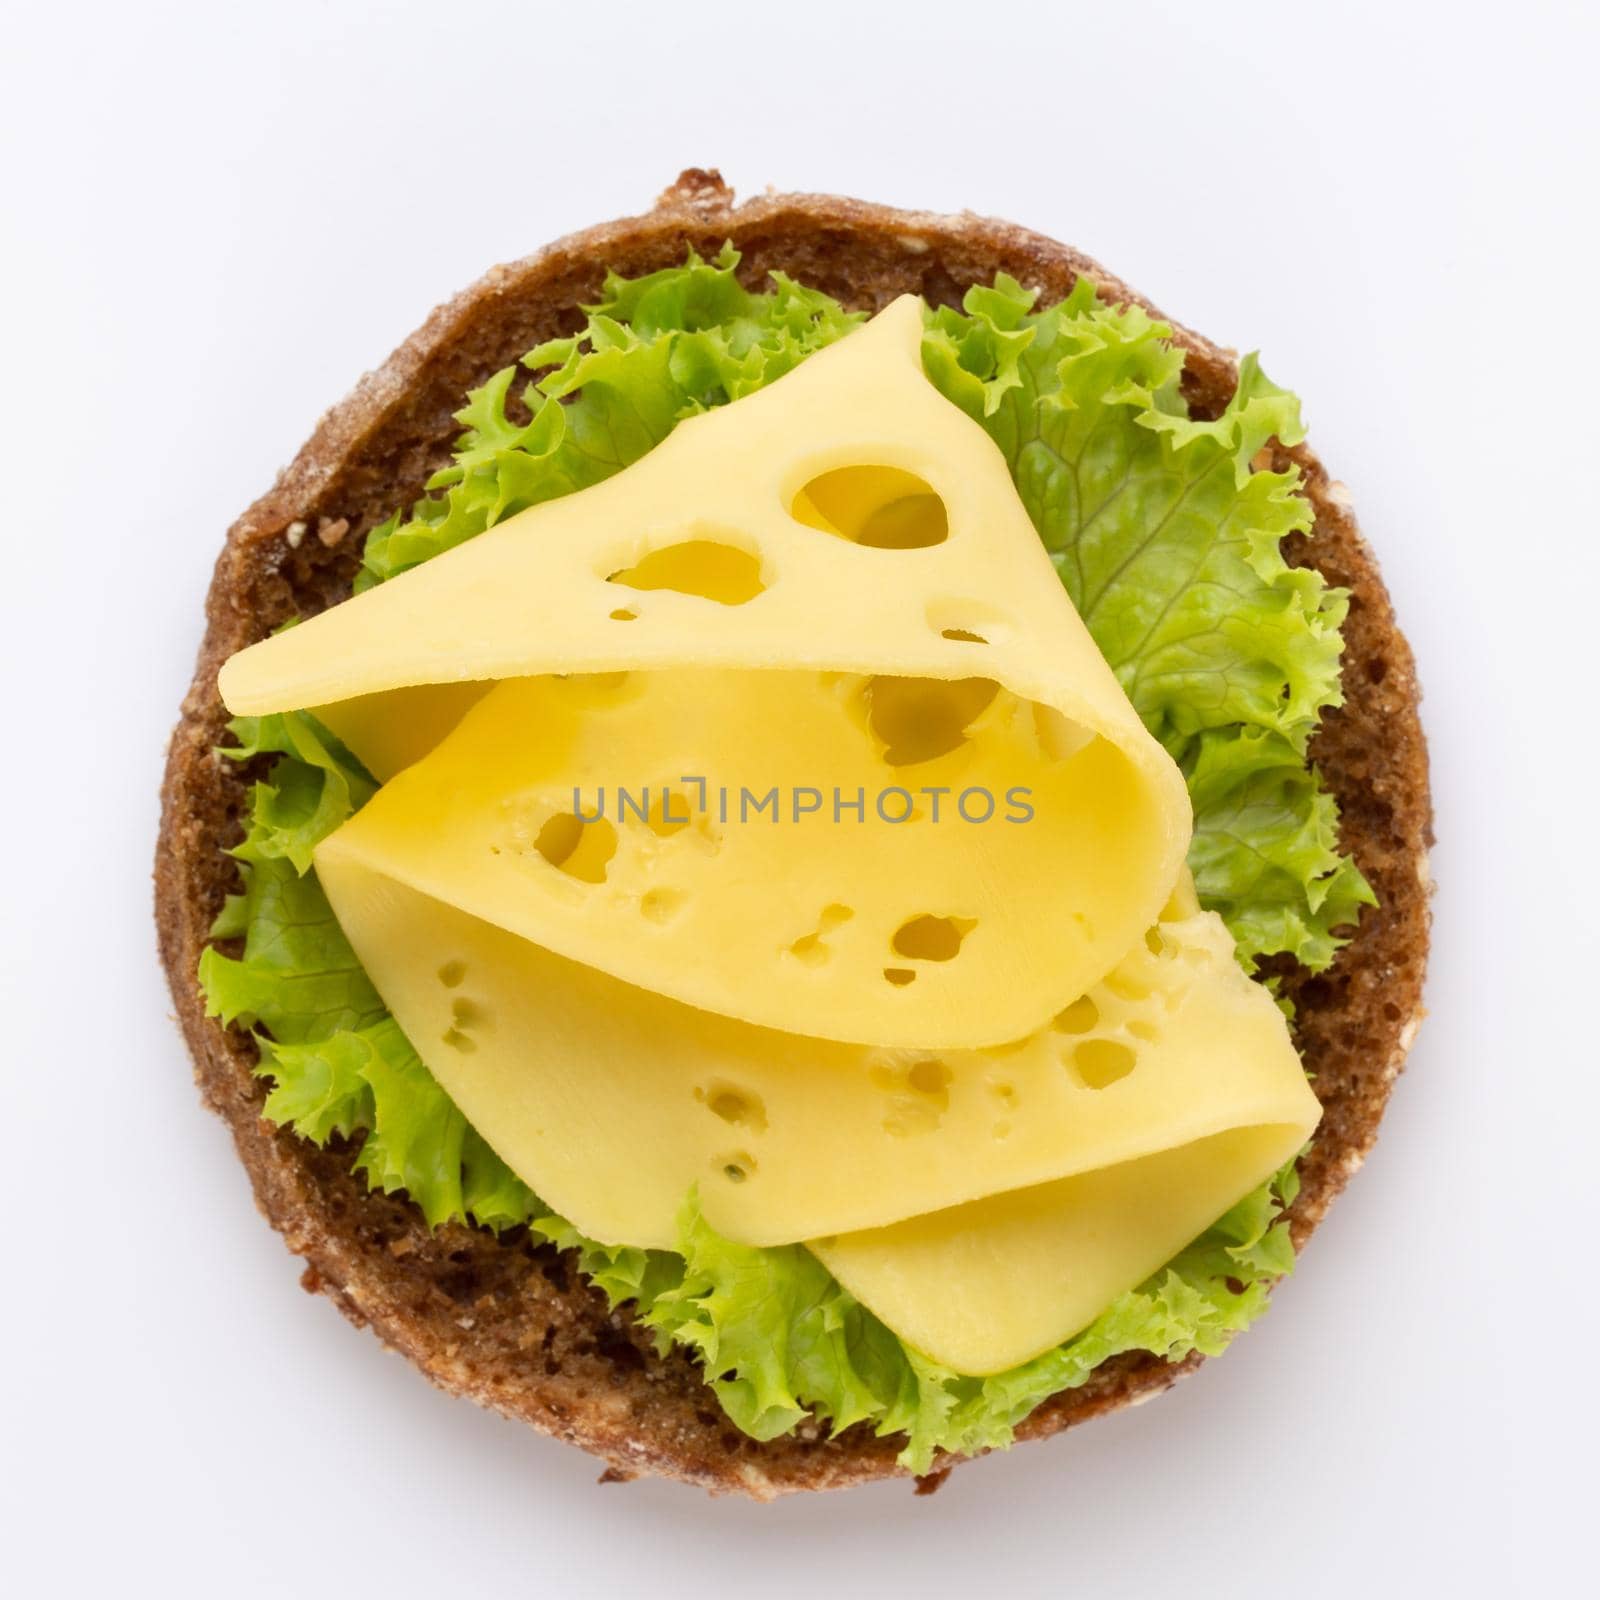 Sandwich with cheese, lettuce, tomato, on white background.